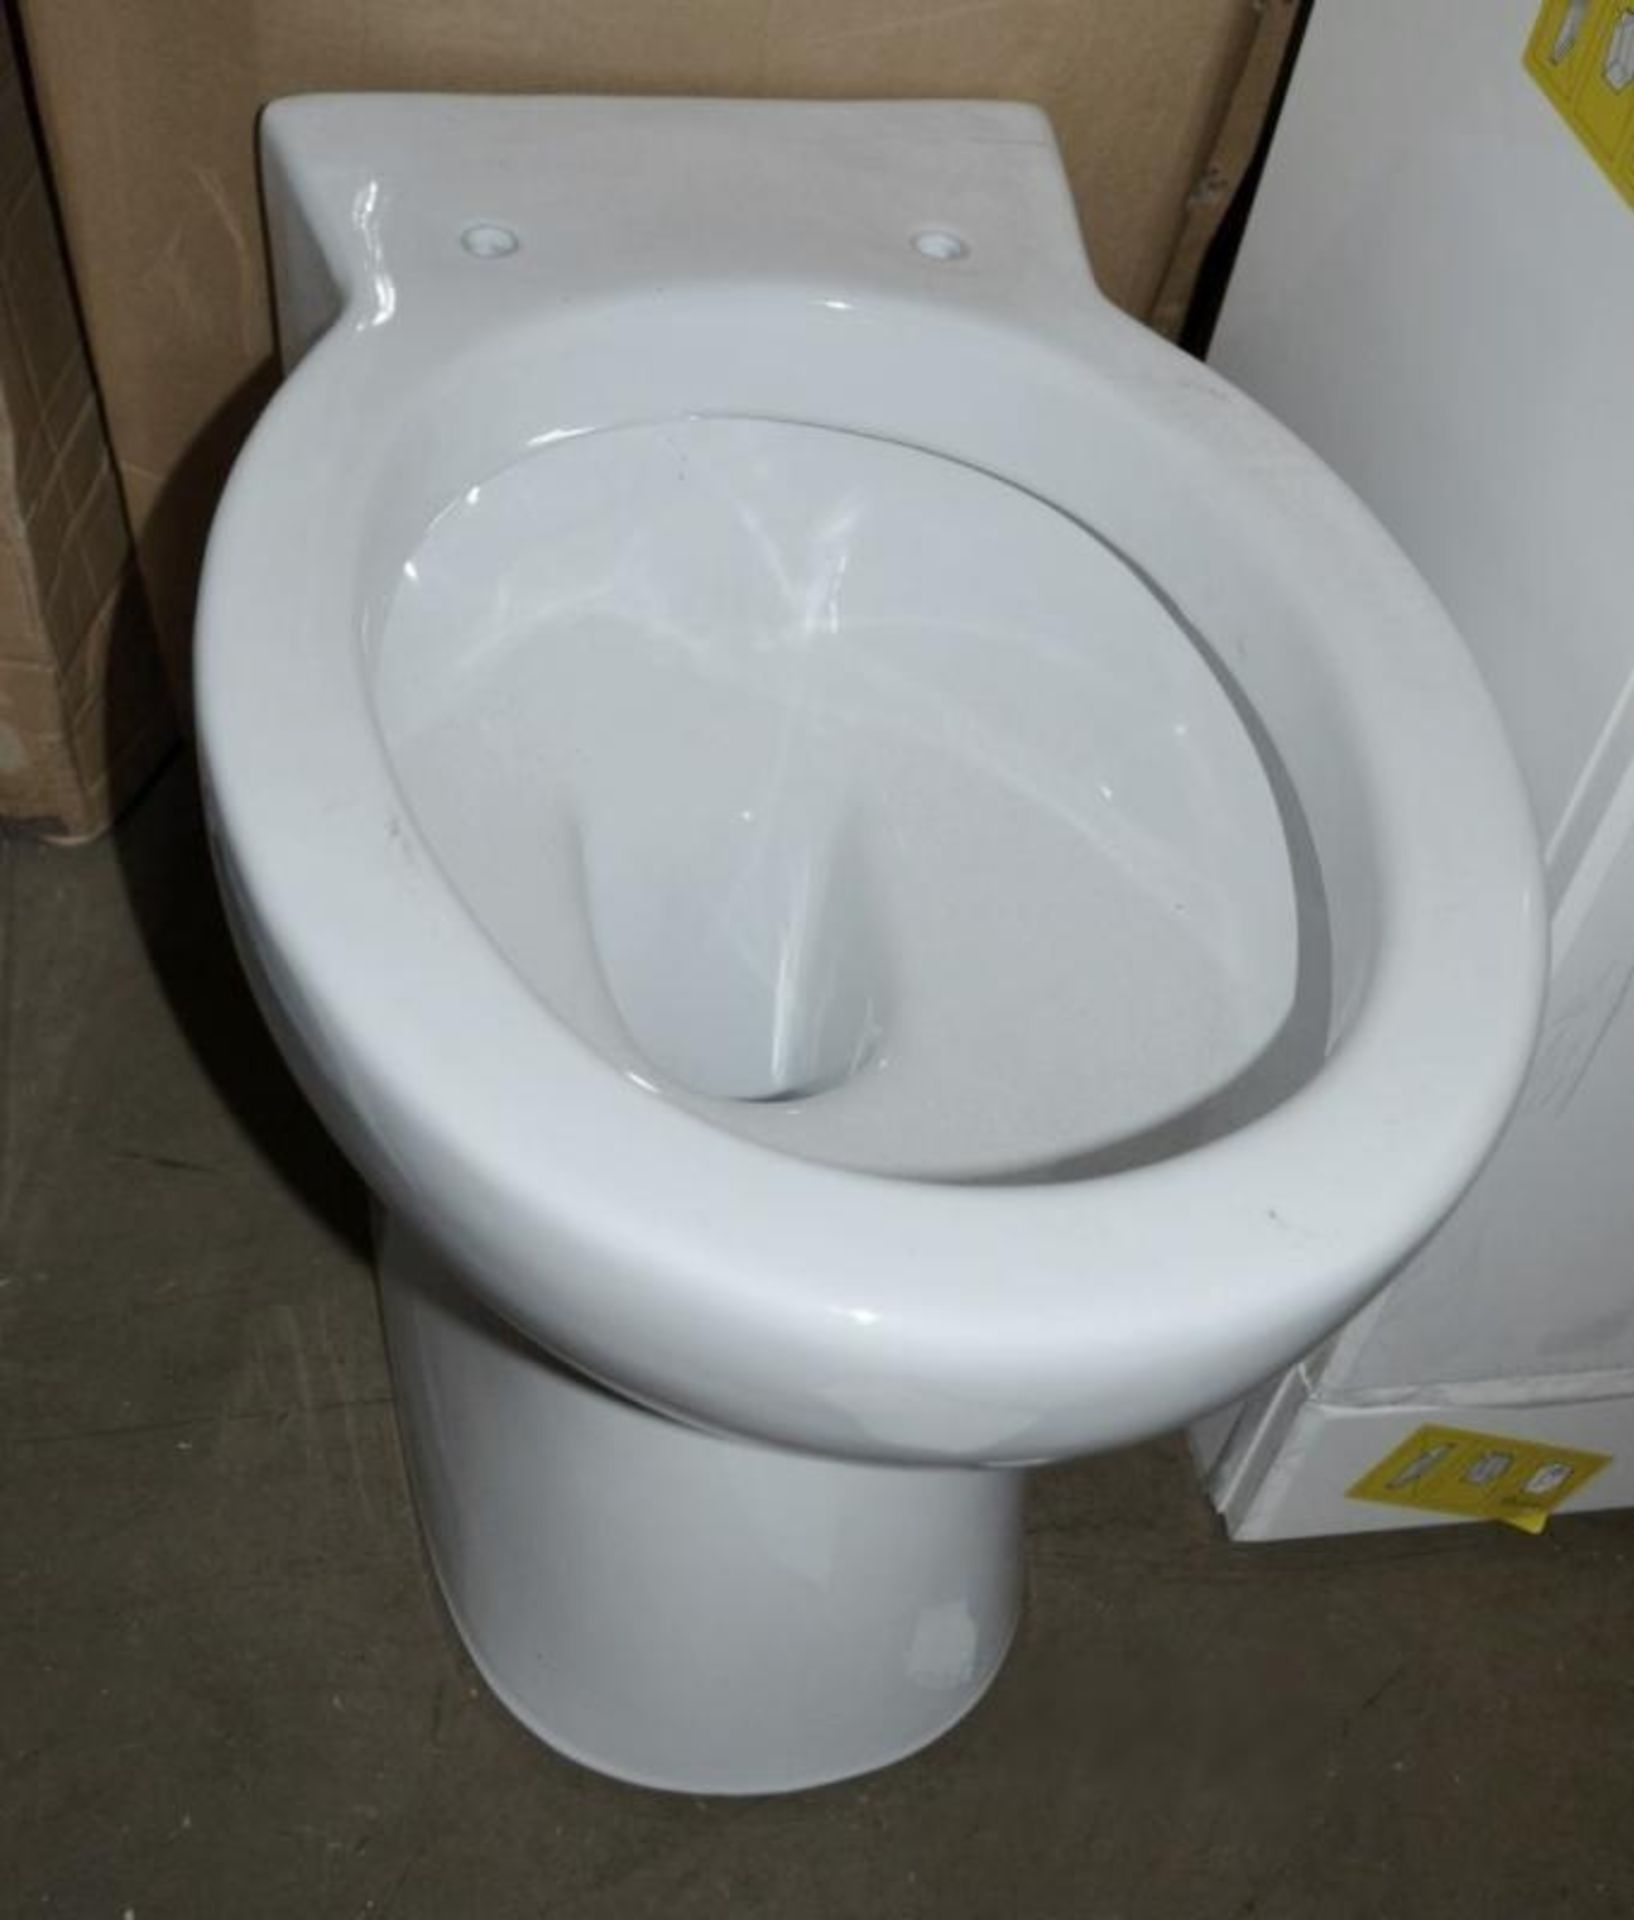 1 x Clarity Back To The Wall Toilet Pan - New / Unused Stock - CL269 - Ref MT765 - Location: Bolton - Image 3 of 3